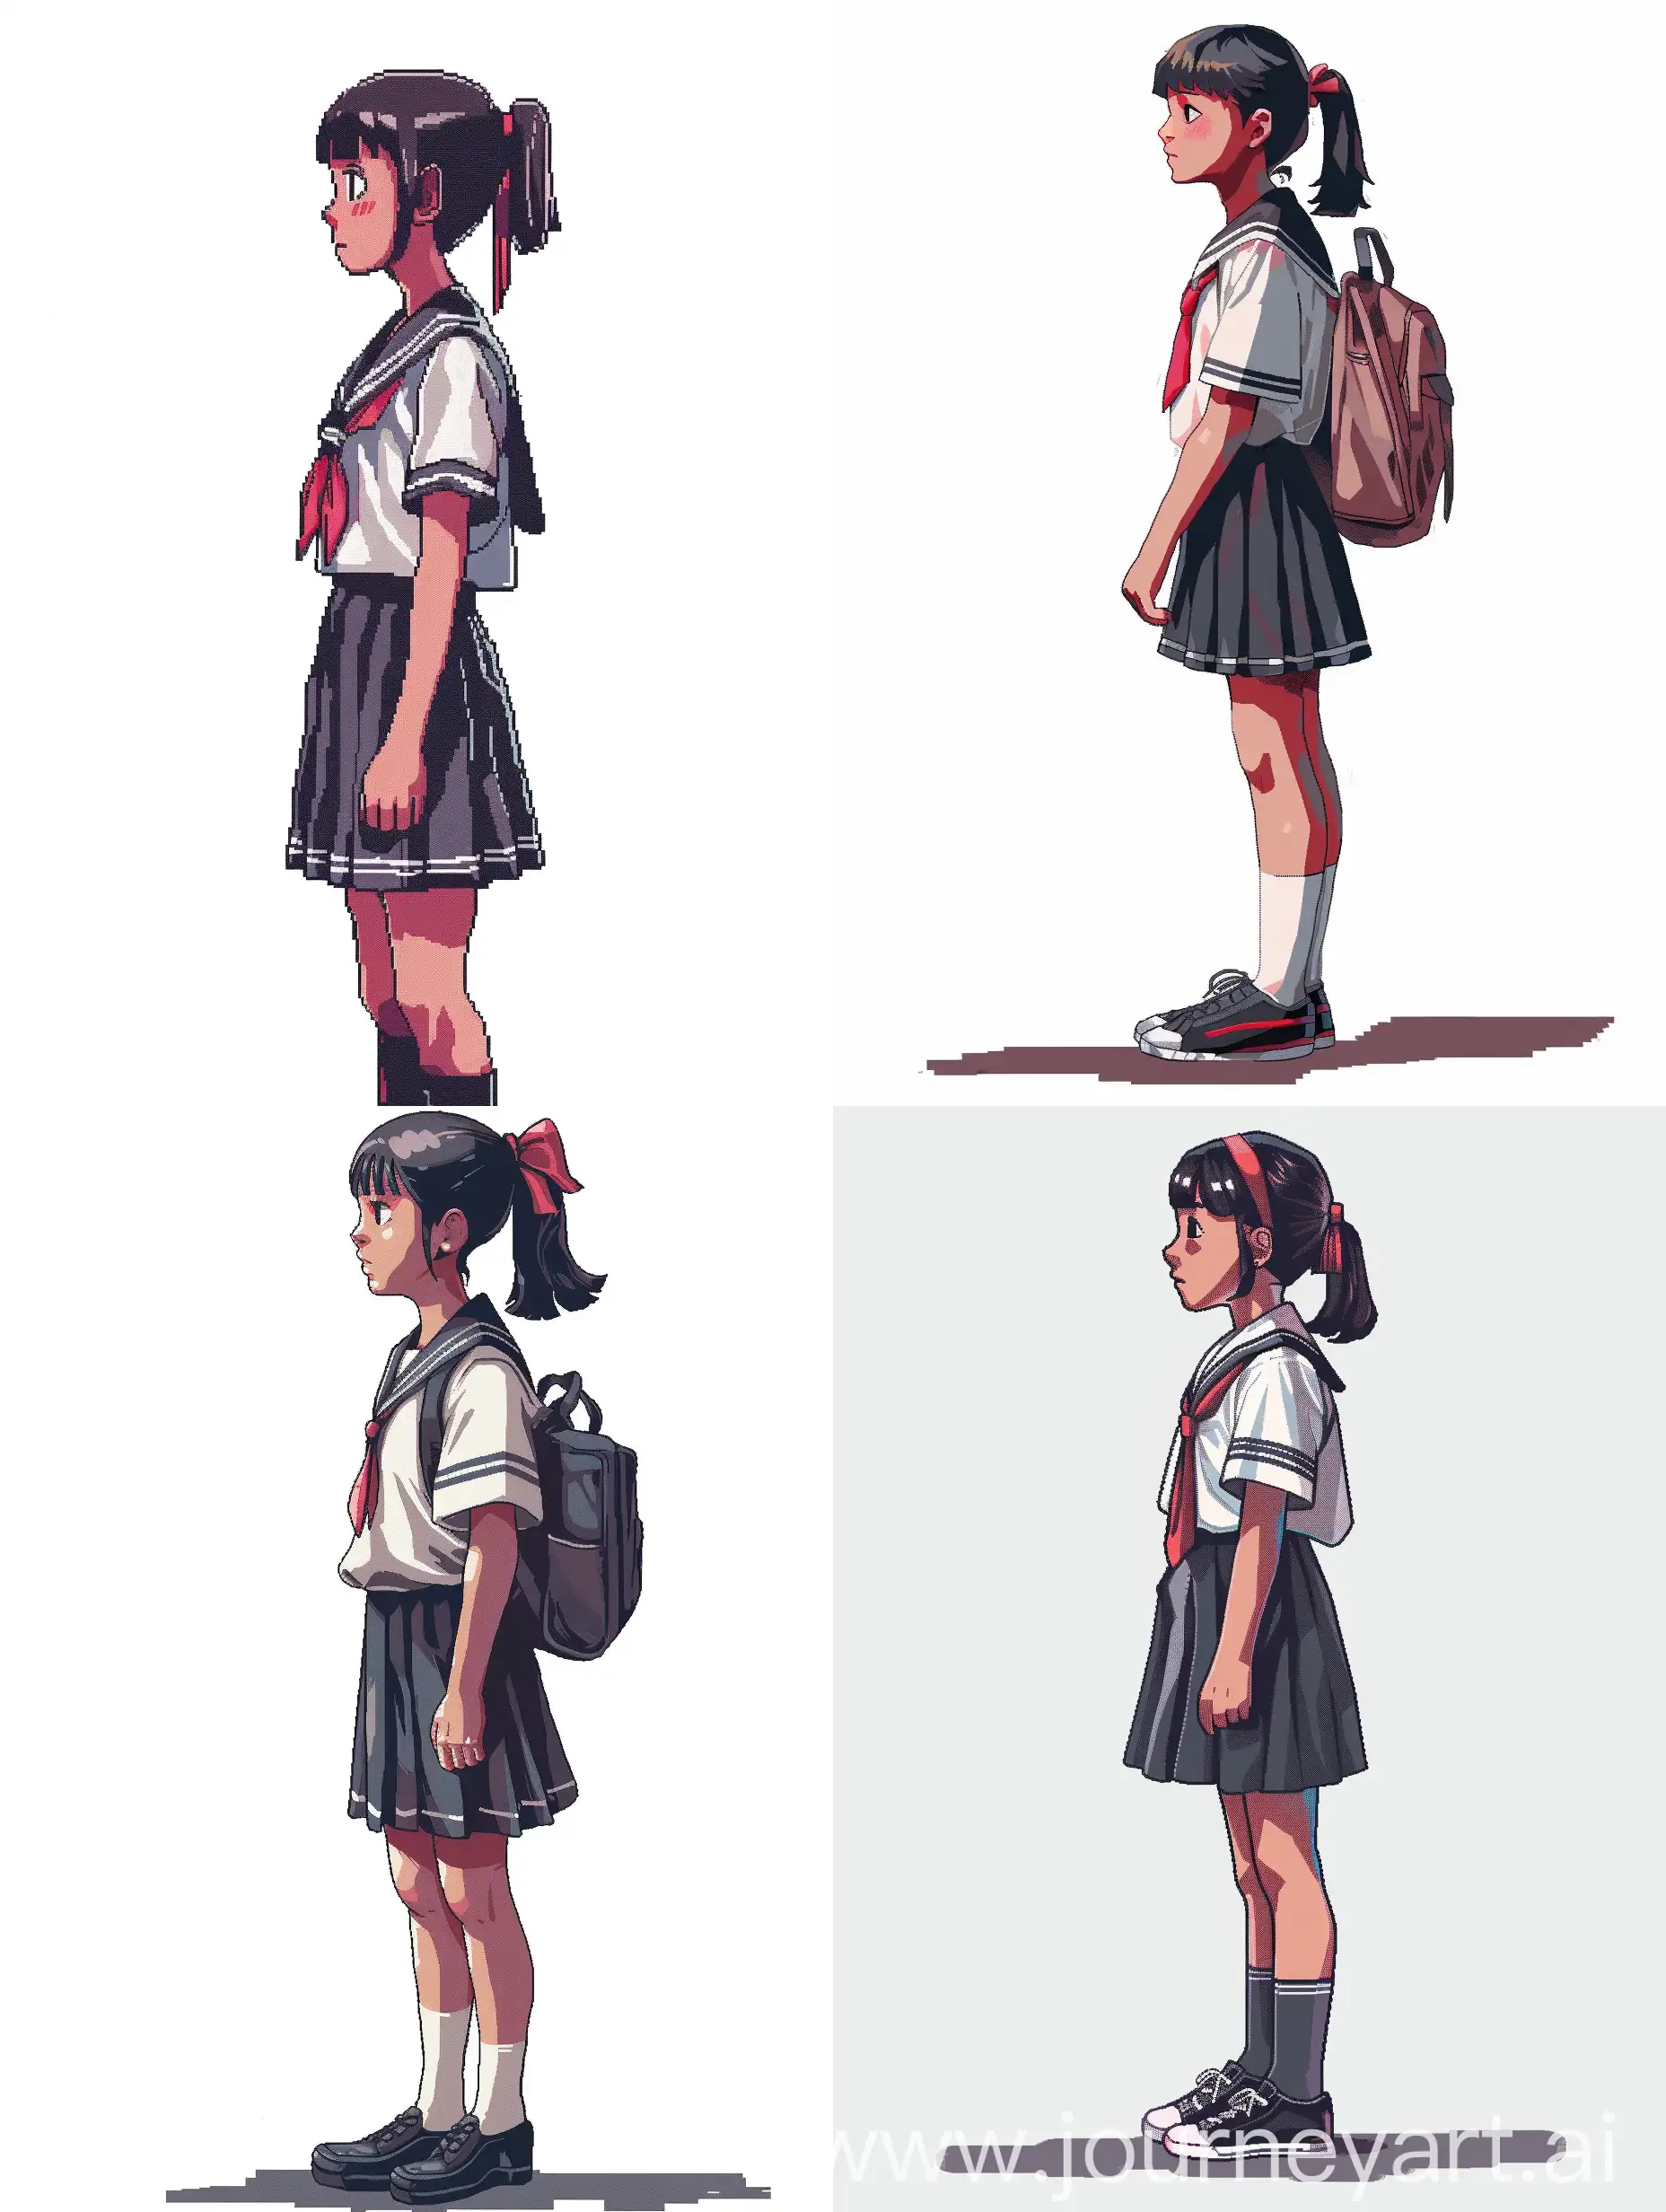 Japanese high school student in school uniform, side view, full length, pixel art, casual style